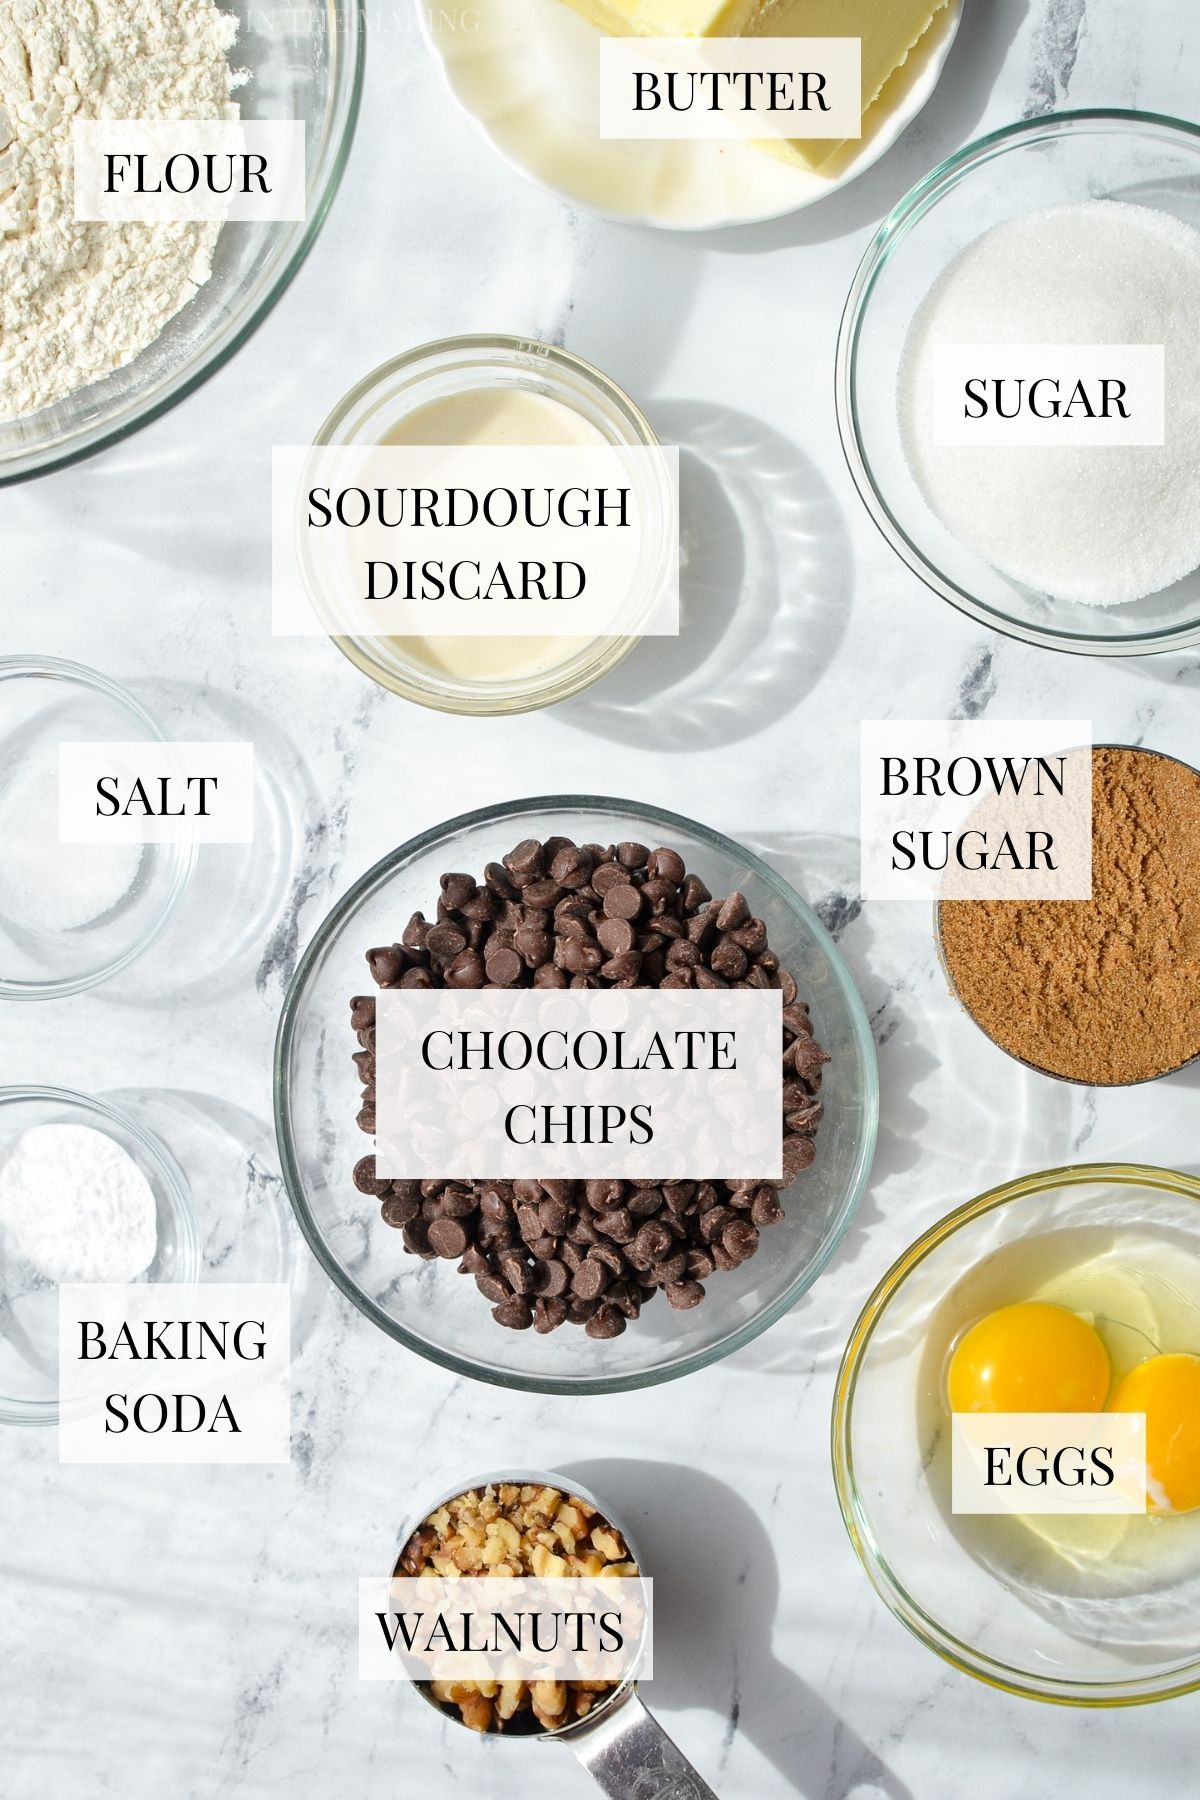 The ingredients needed to make chocolate chip cookies.